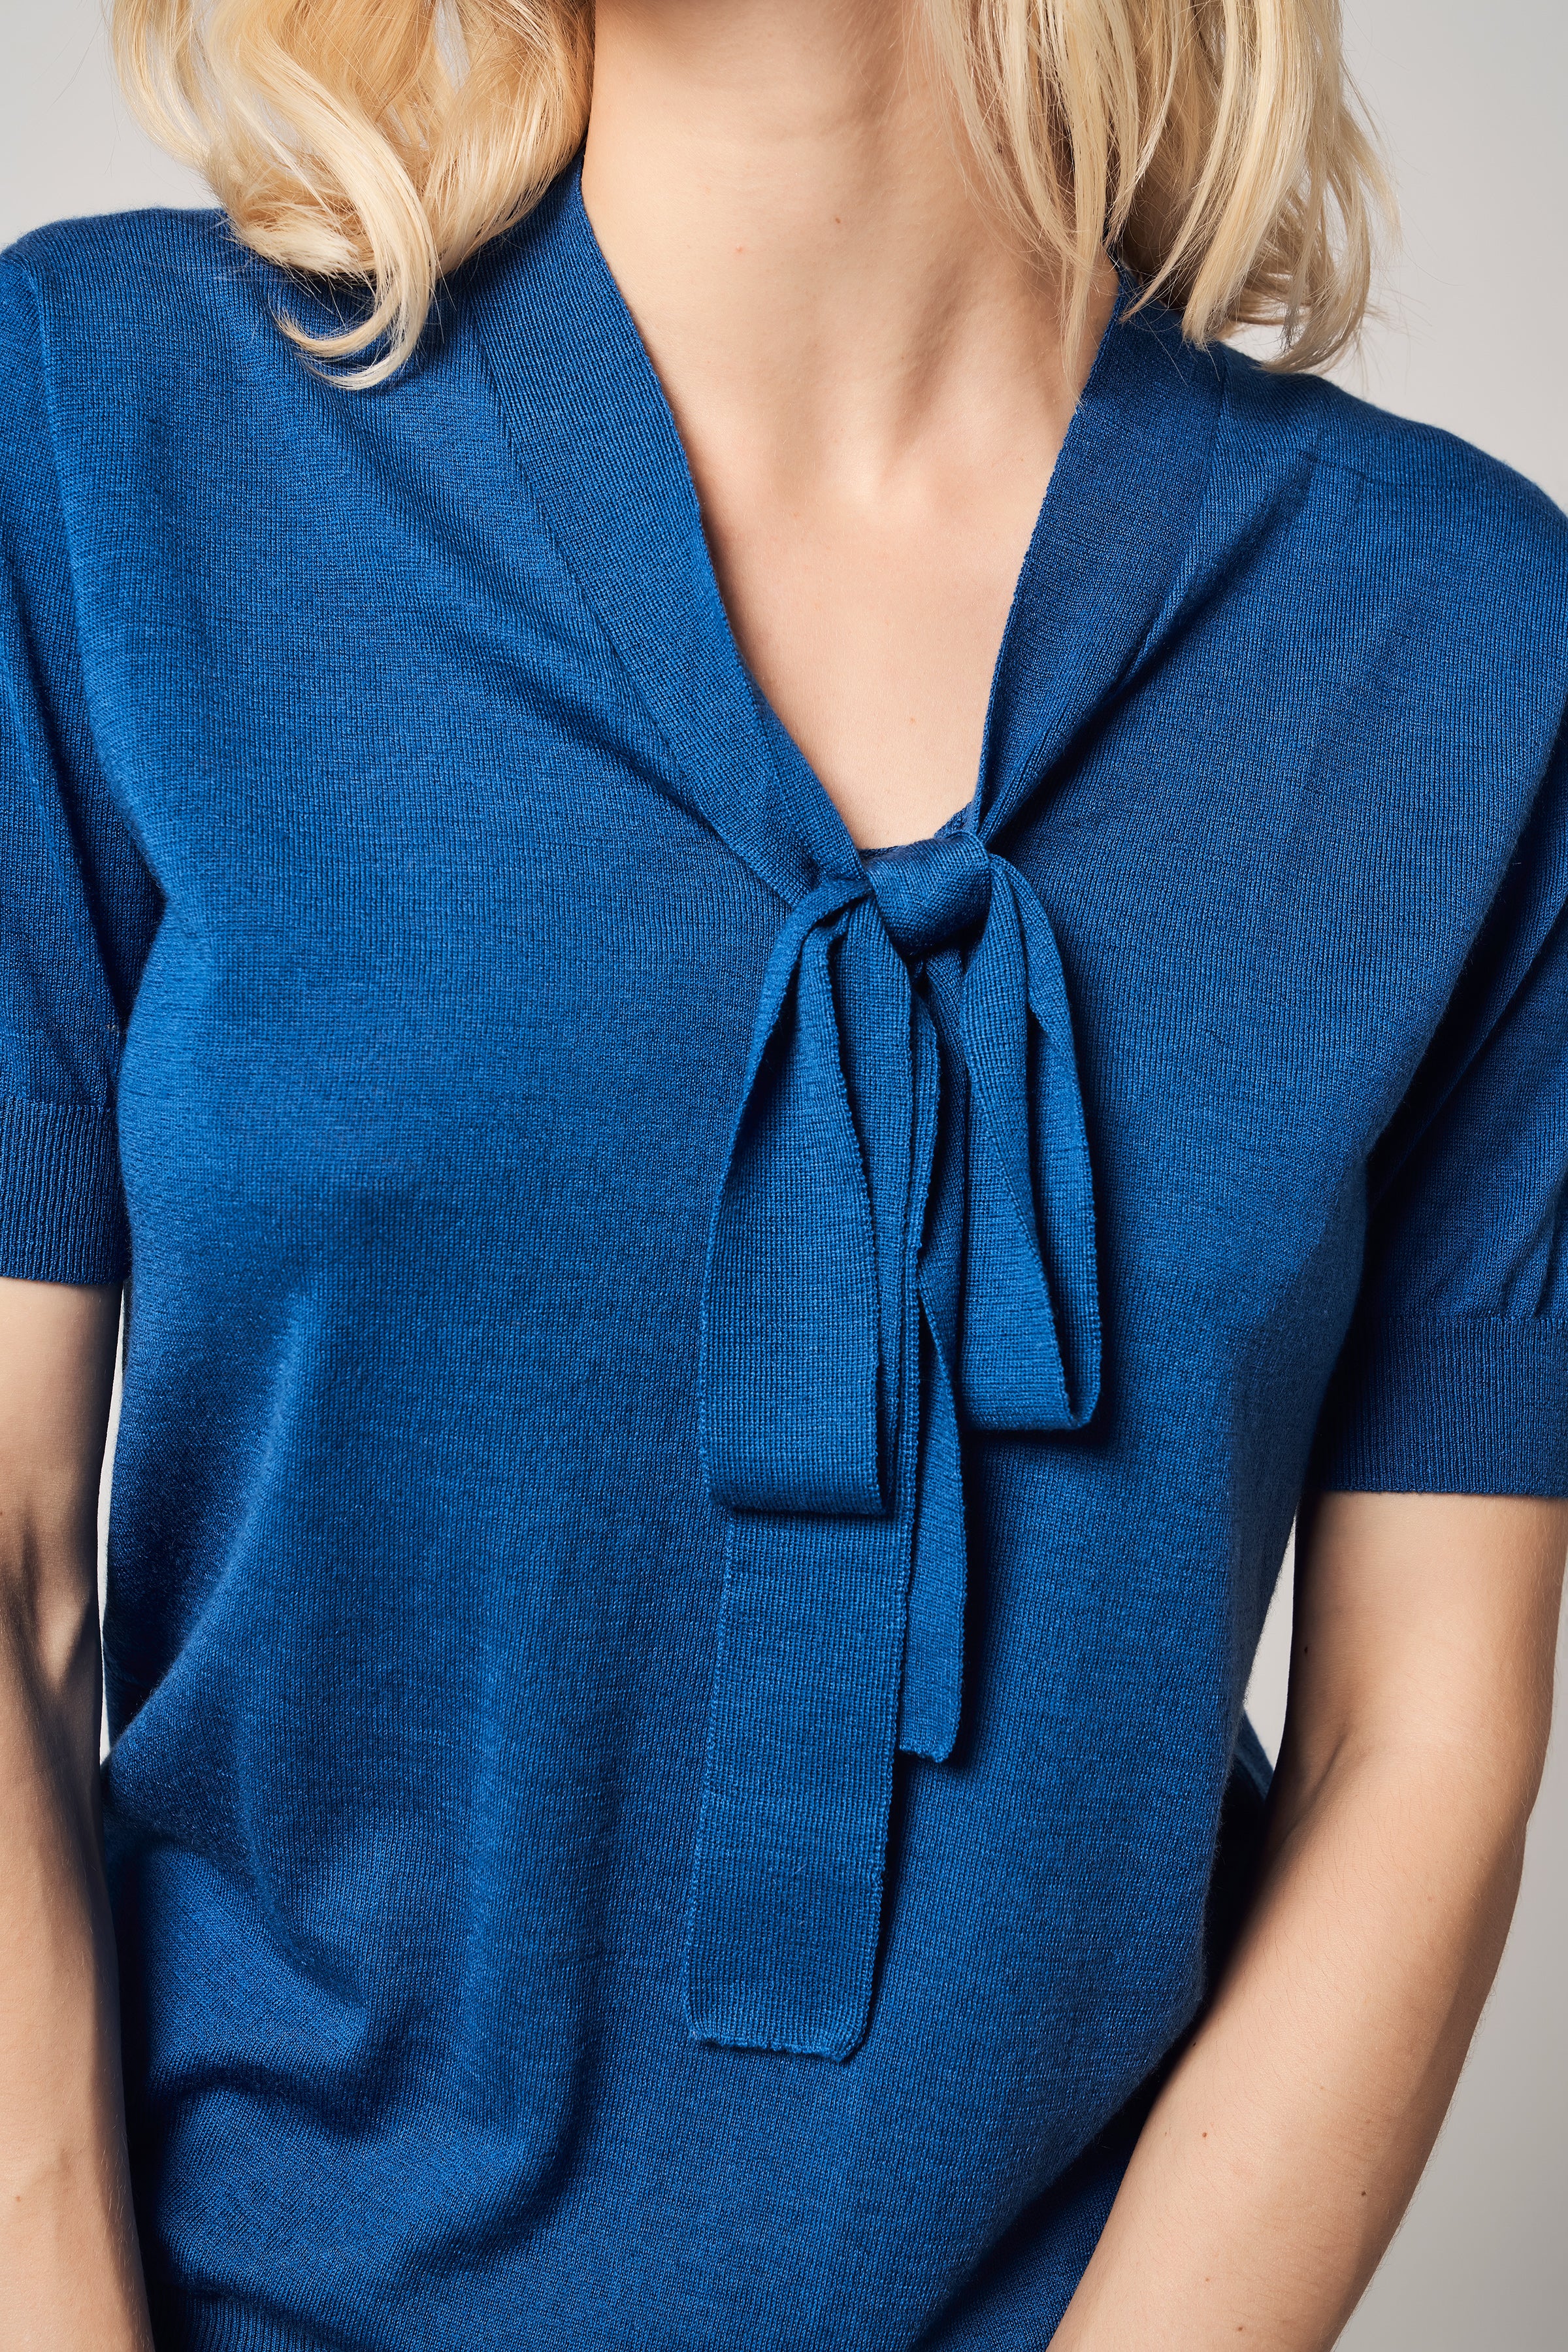 Tie Neck Worsted Cashmere Top